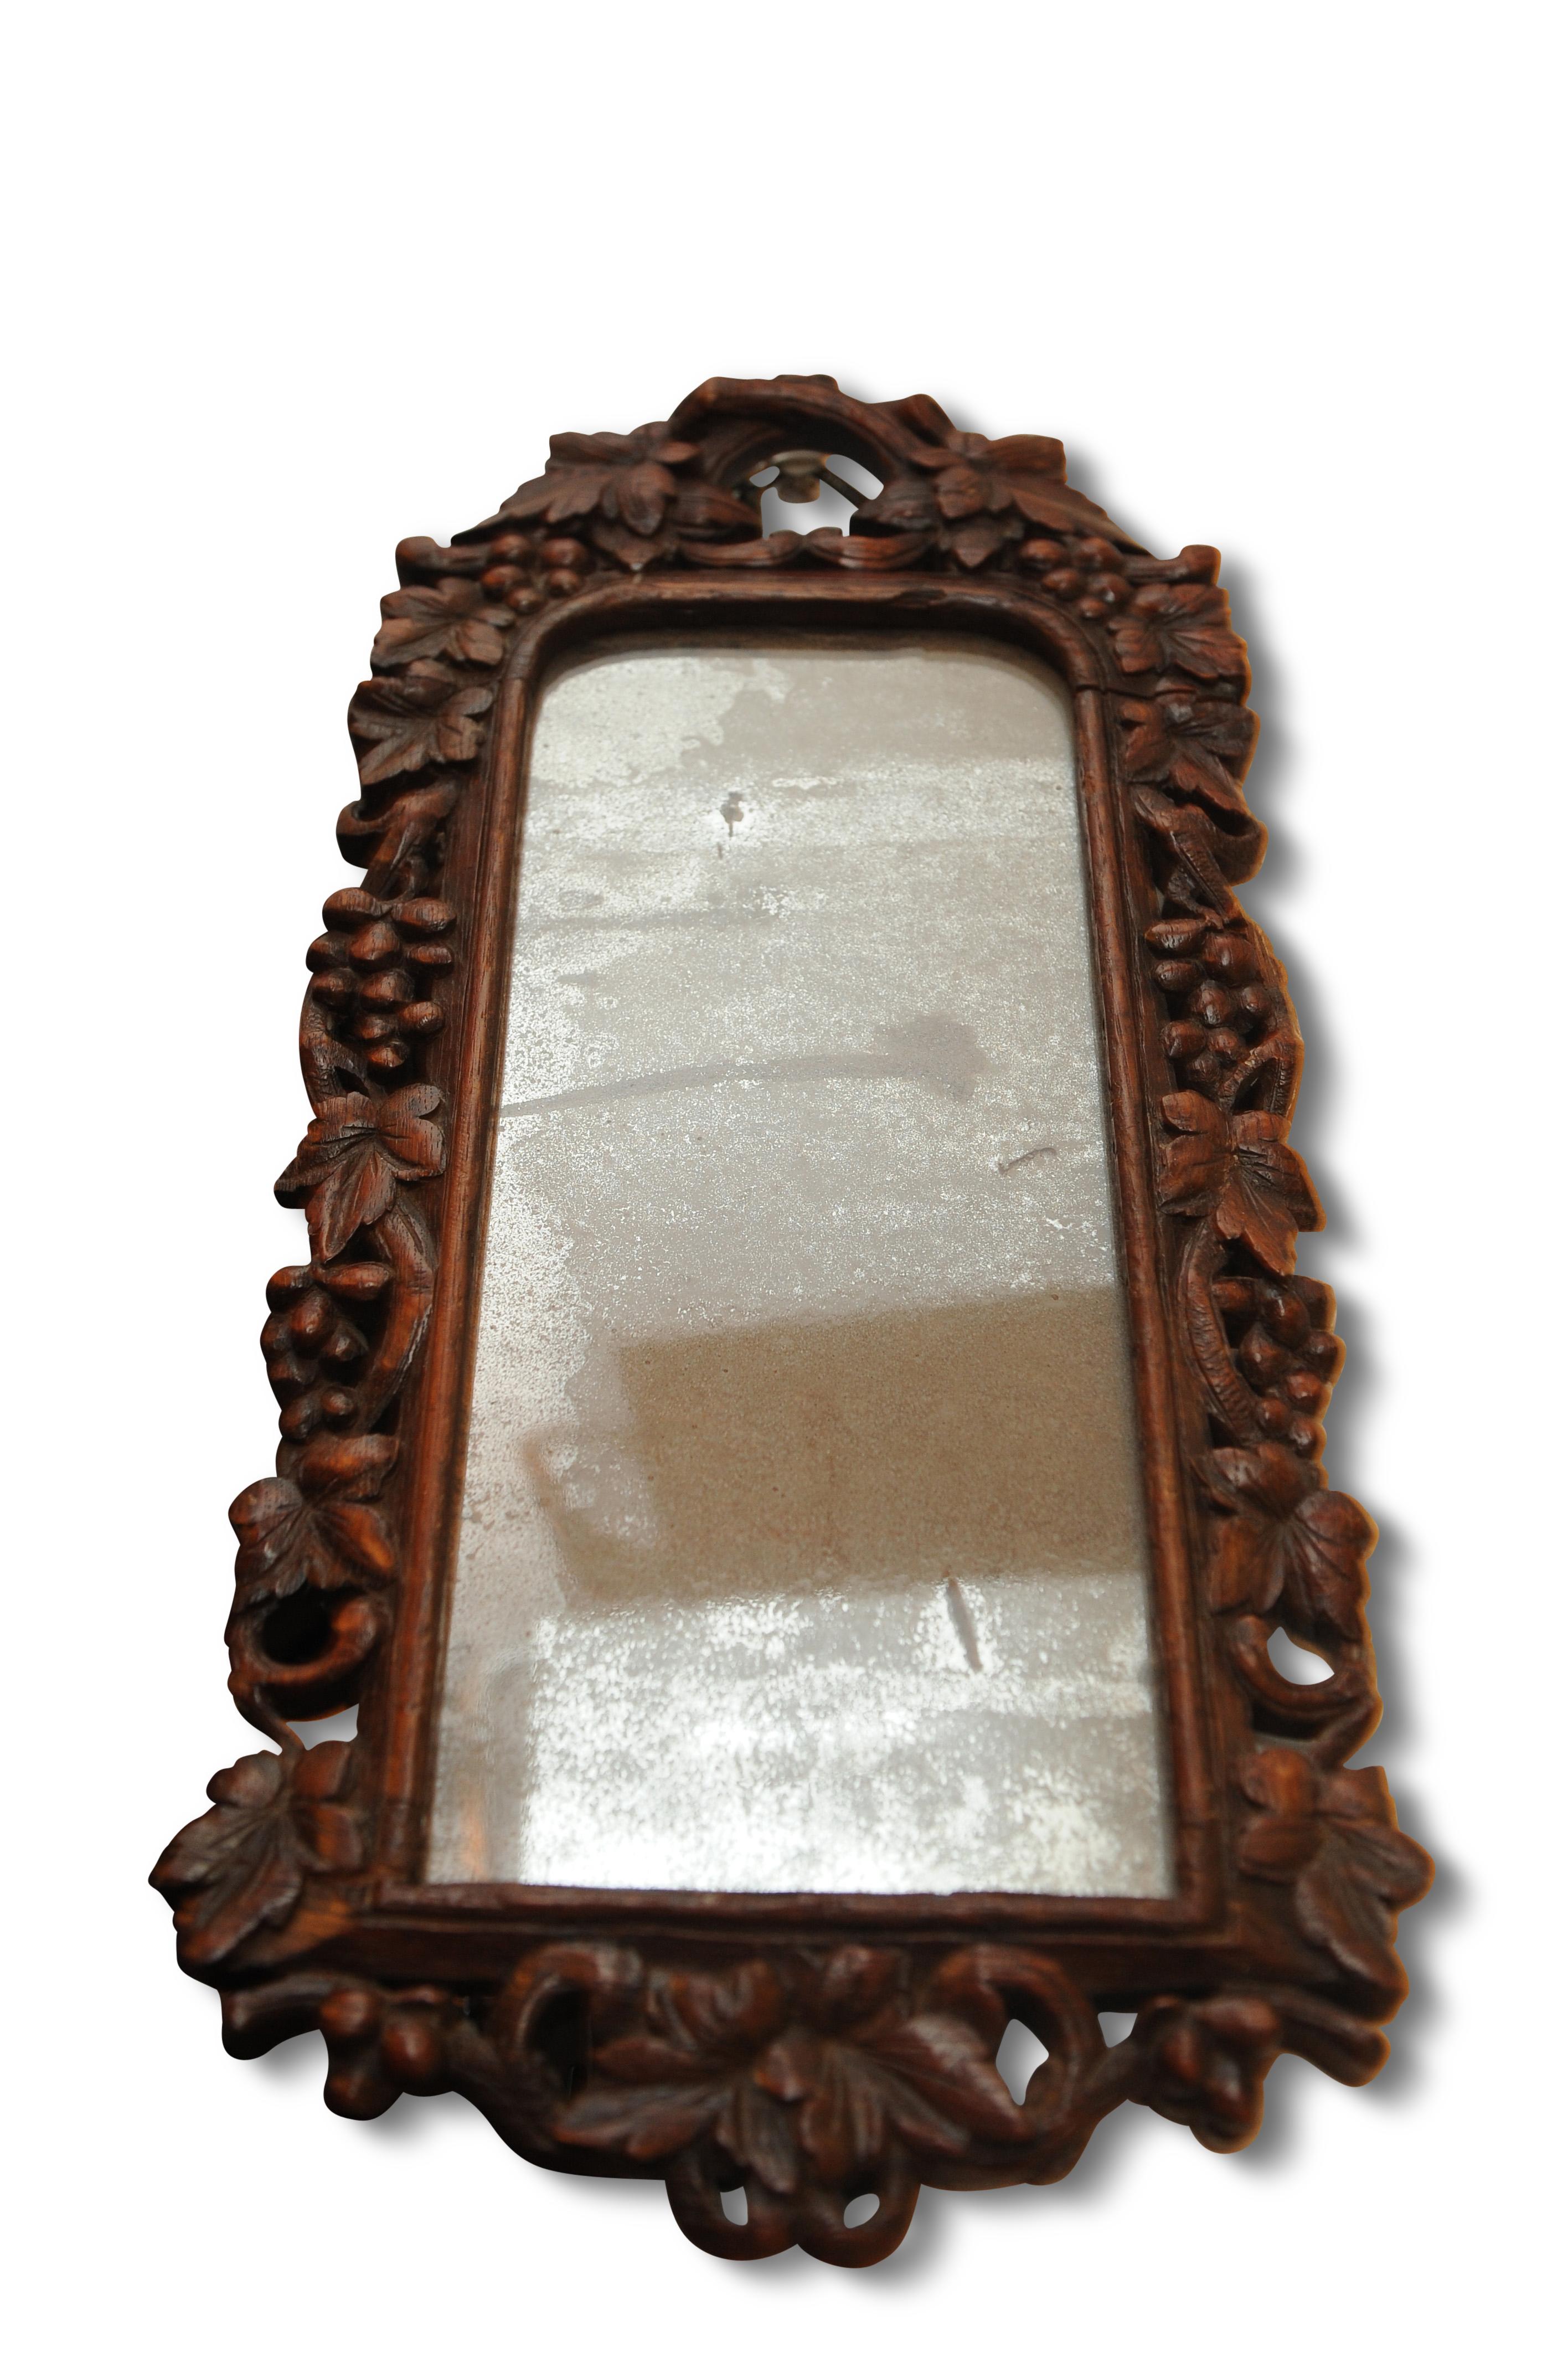 Unusual Black Forest, Bavarian oak wall mirror, the frame intricately carved with berries and foliage. With the original mercury glass mirror.

The piece retains the original mercury glass mirror, with a wonderful silvered patina to the face,